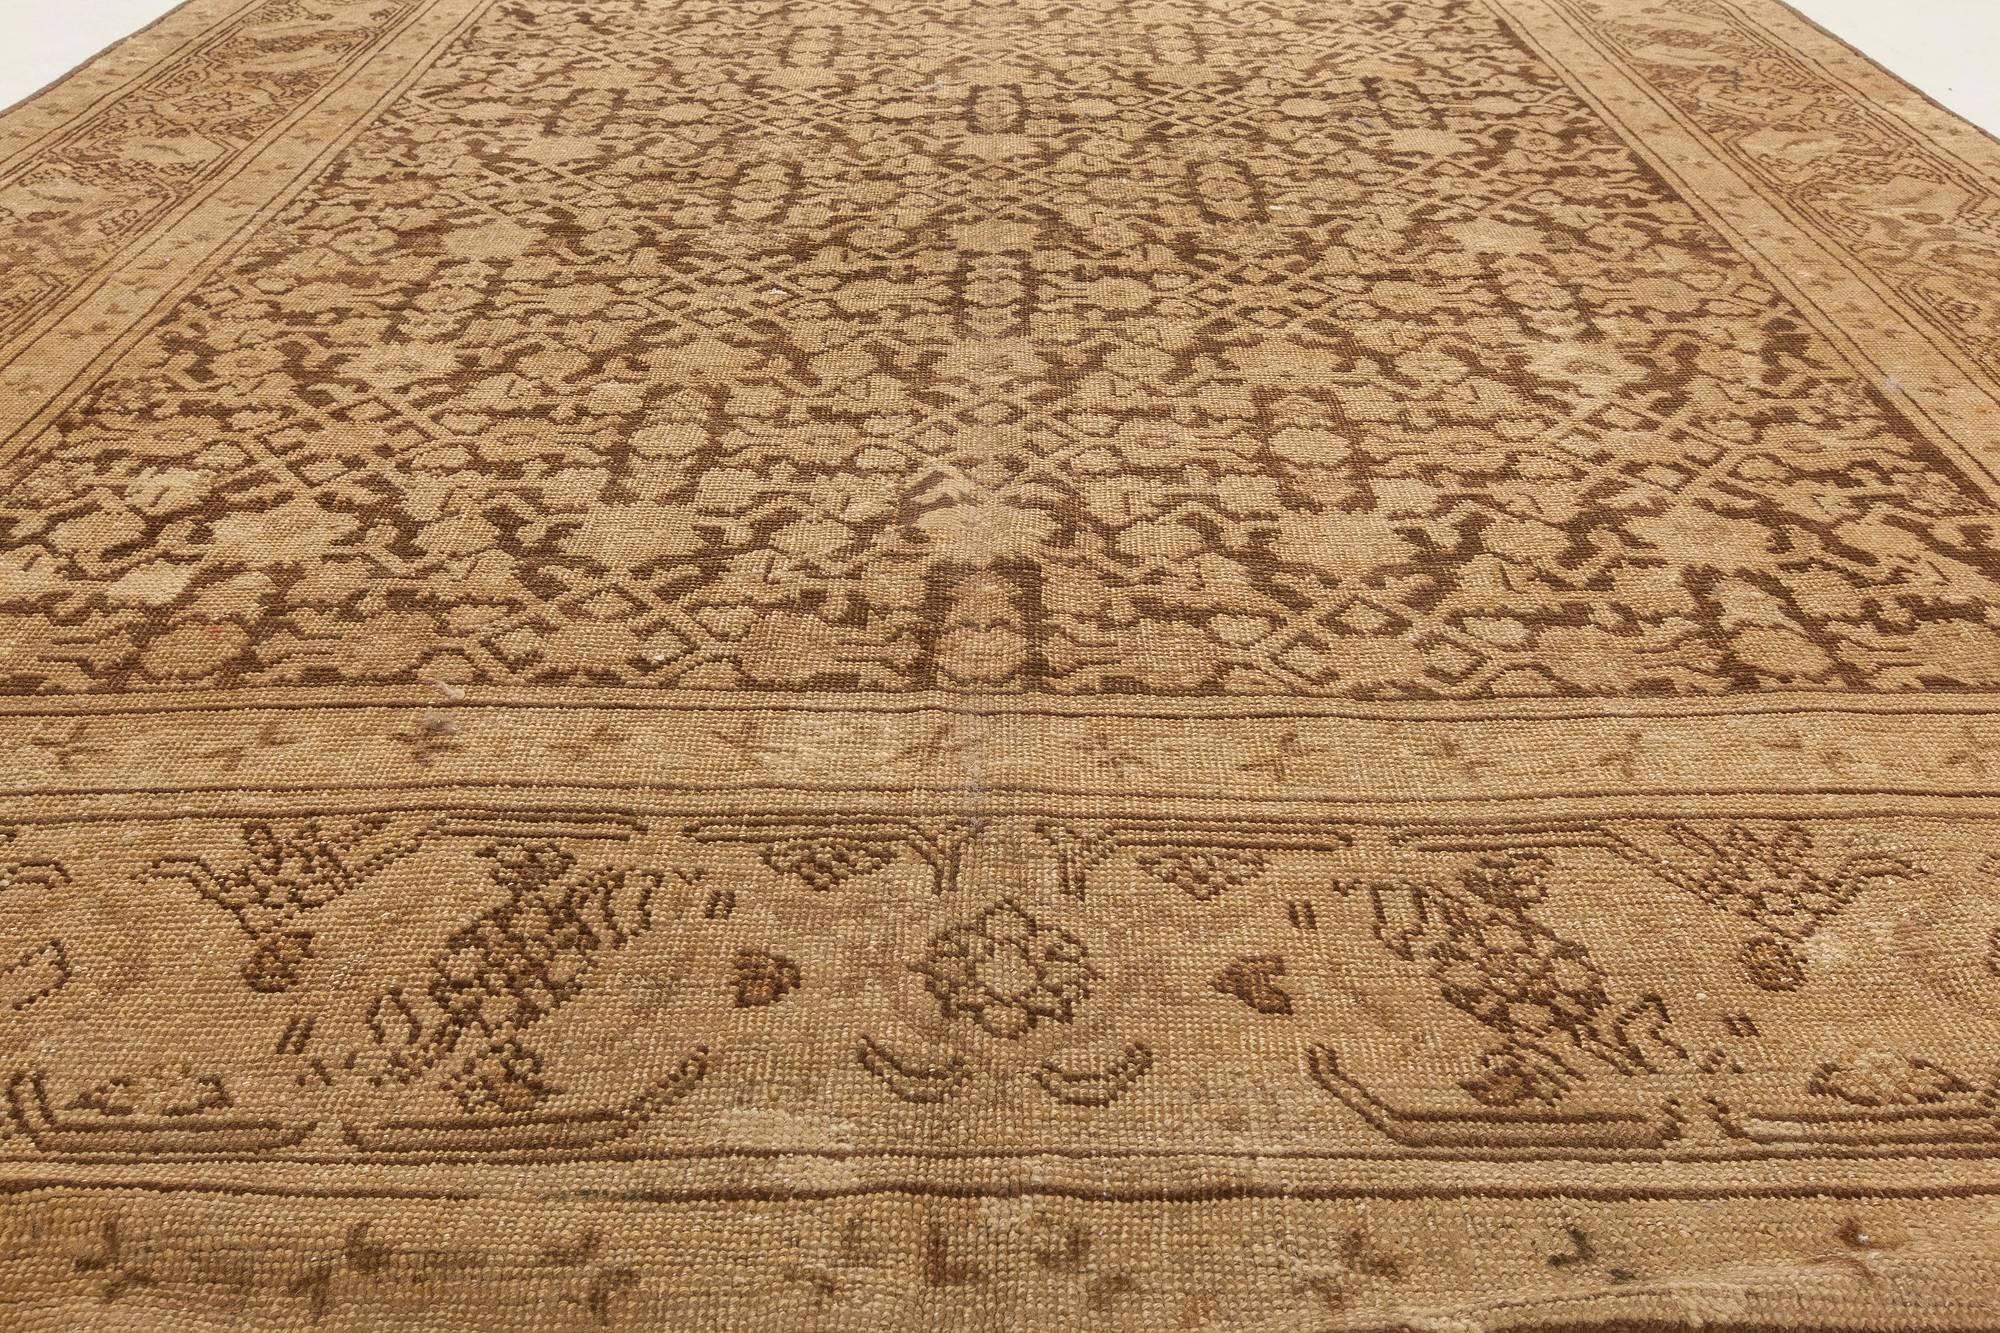 Early 20th Century Karabagh Handmade Wool Rug In Good Condition For Sale In New York, NY